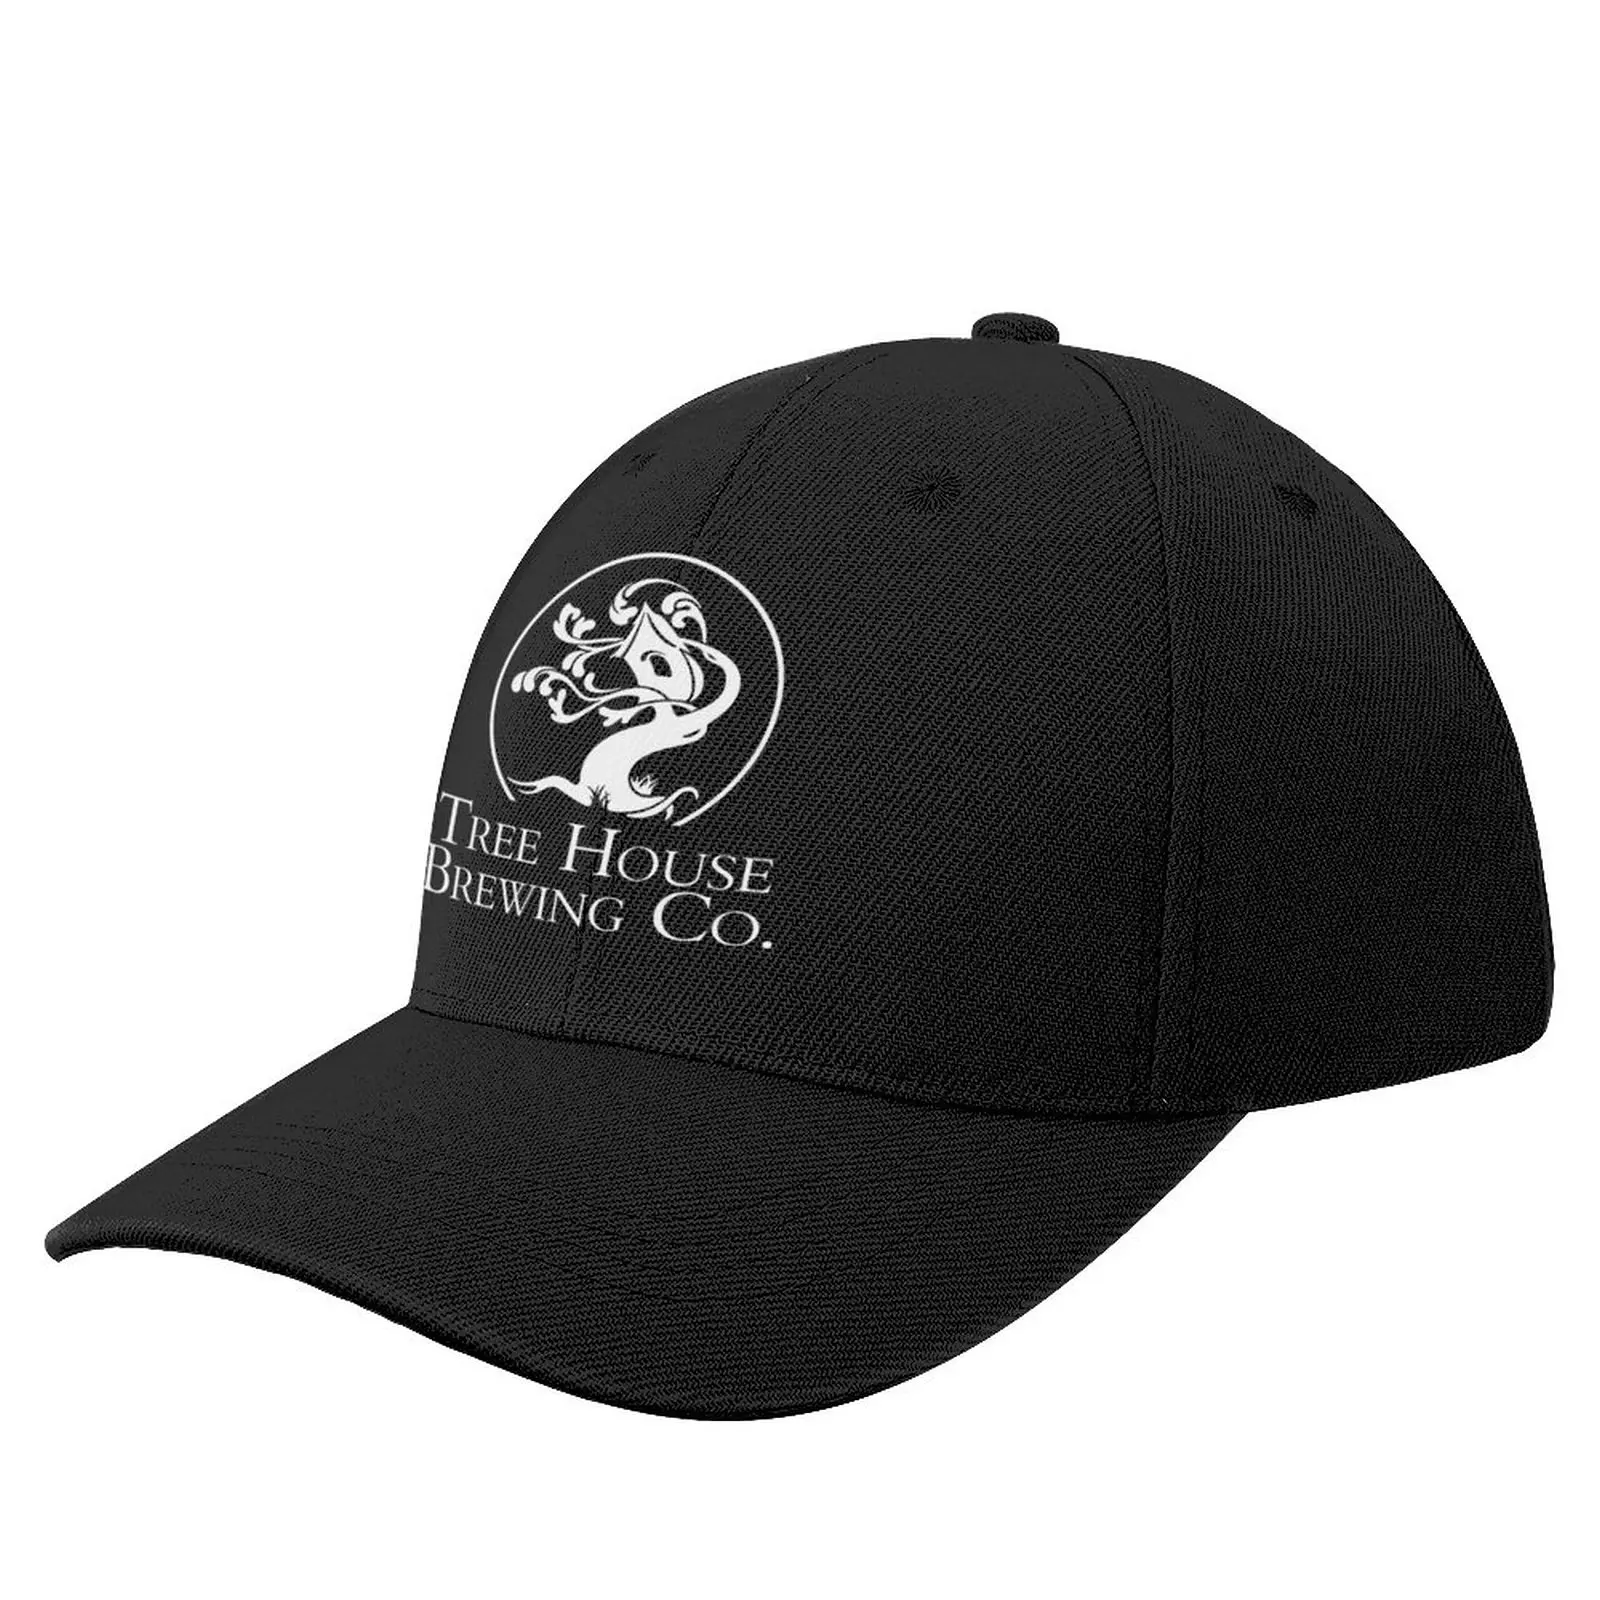 

Tree House Brewing Co Baseball Cap funny hat Sports Caps Caps For Men Women'S